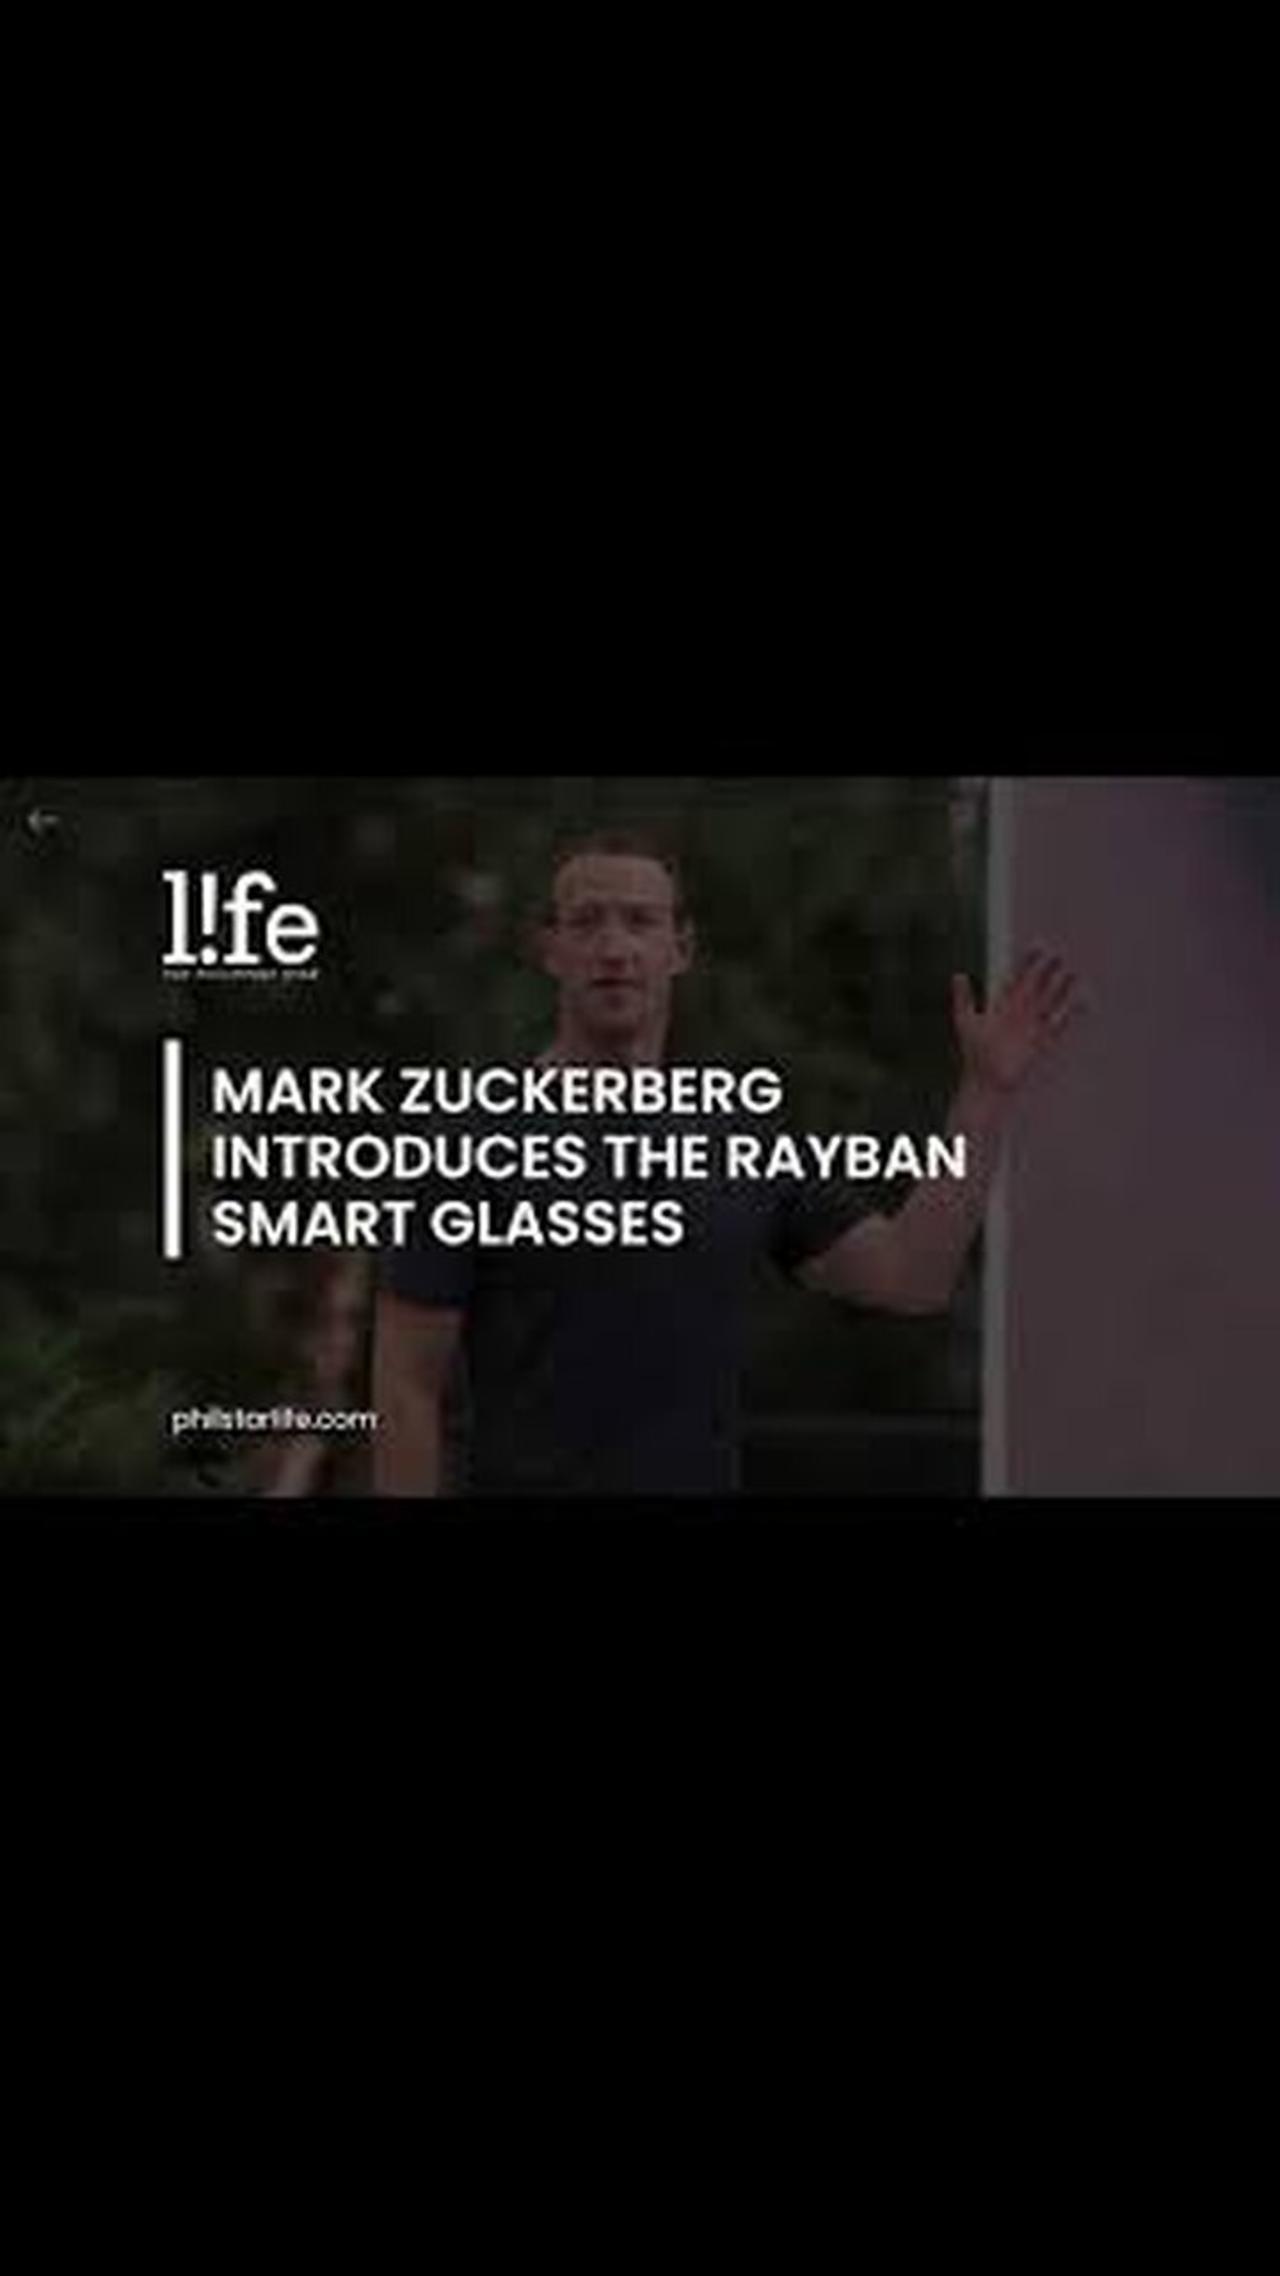 Meta CEO Mark Zuckerberg looks to digital assistants, smart glasses and AI to help metaverse push..